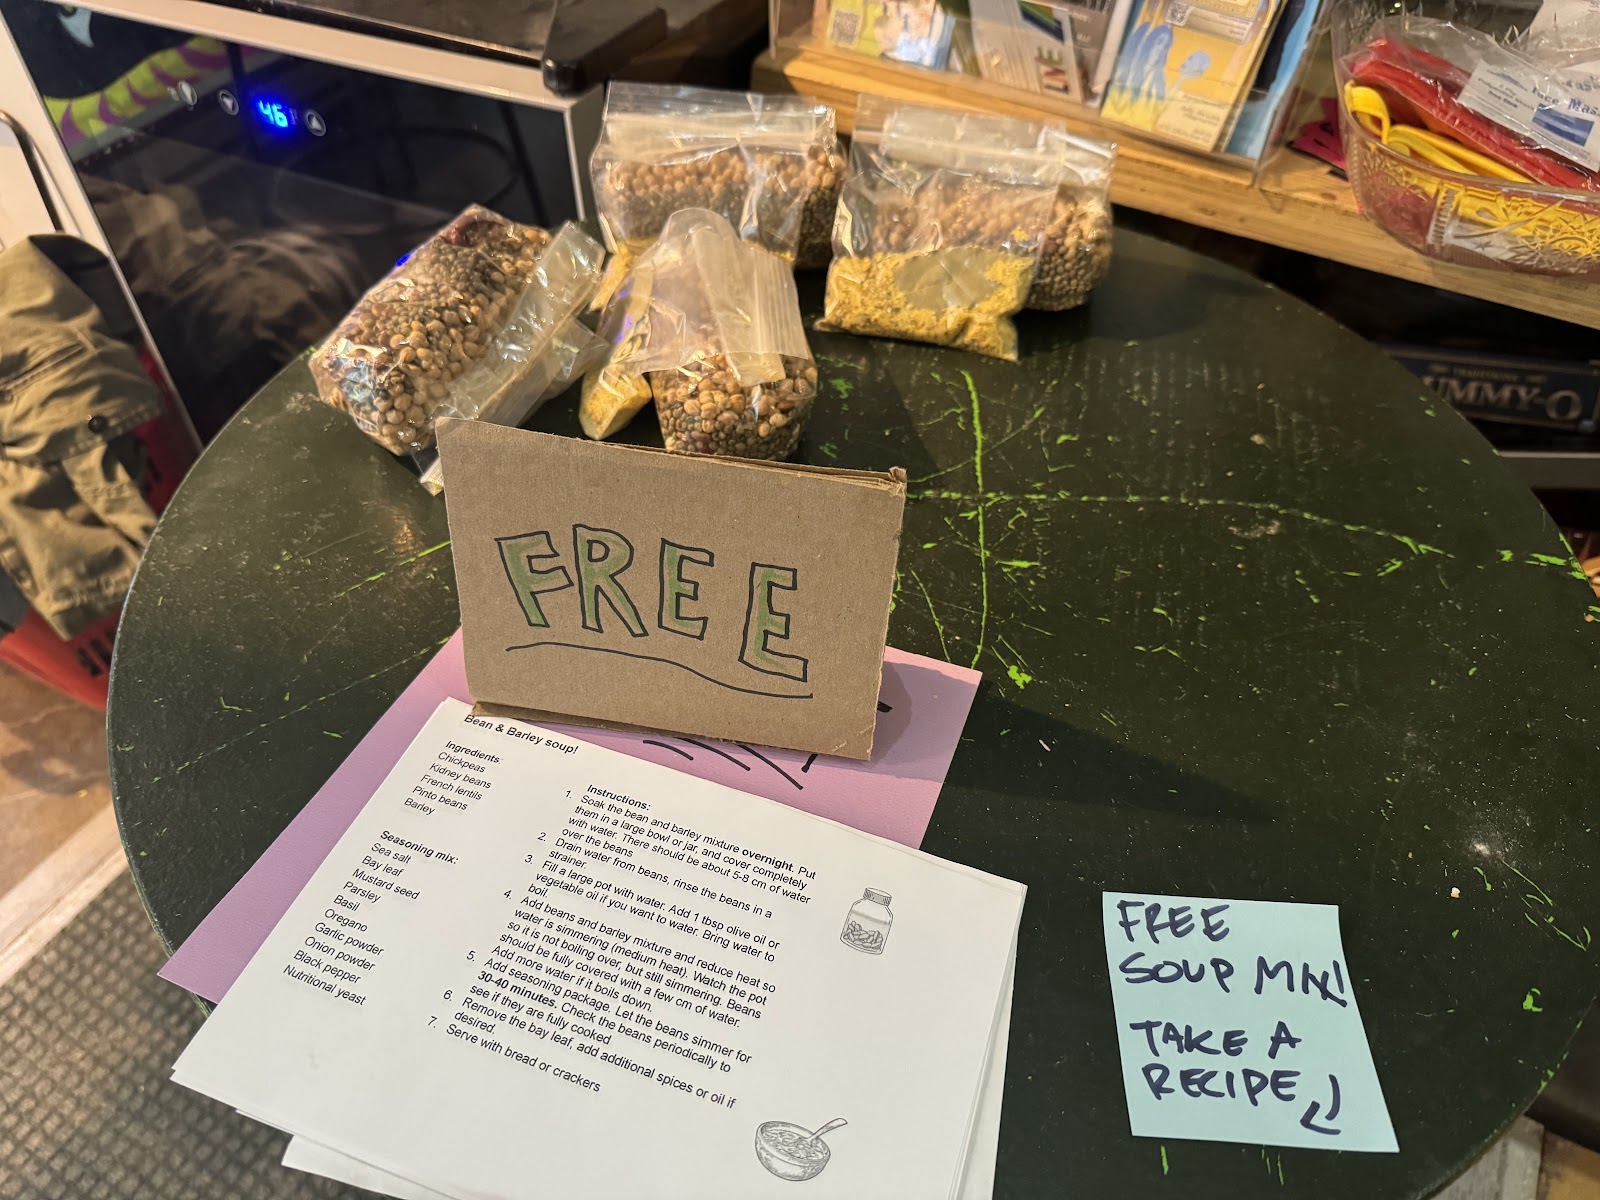 A table with bags of beans and soup ingredients, a handmade sign that says “FREE” and “Bean & Barley soup” recipes. A post-it note says “FREE SOUP MIX! TAKE A RECIPE.”